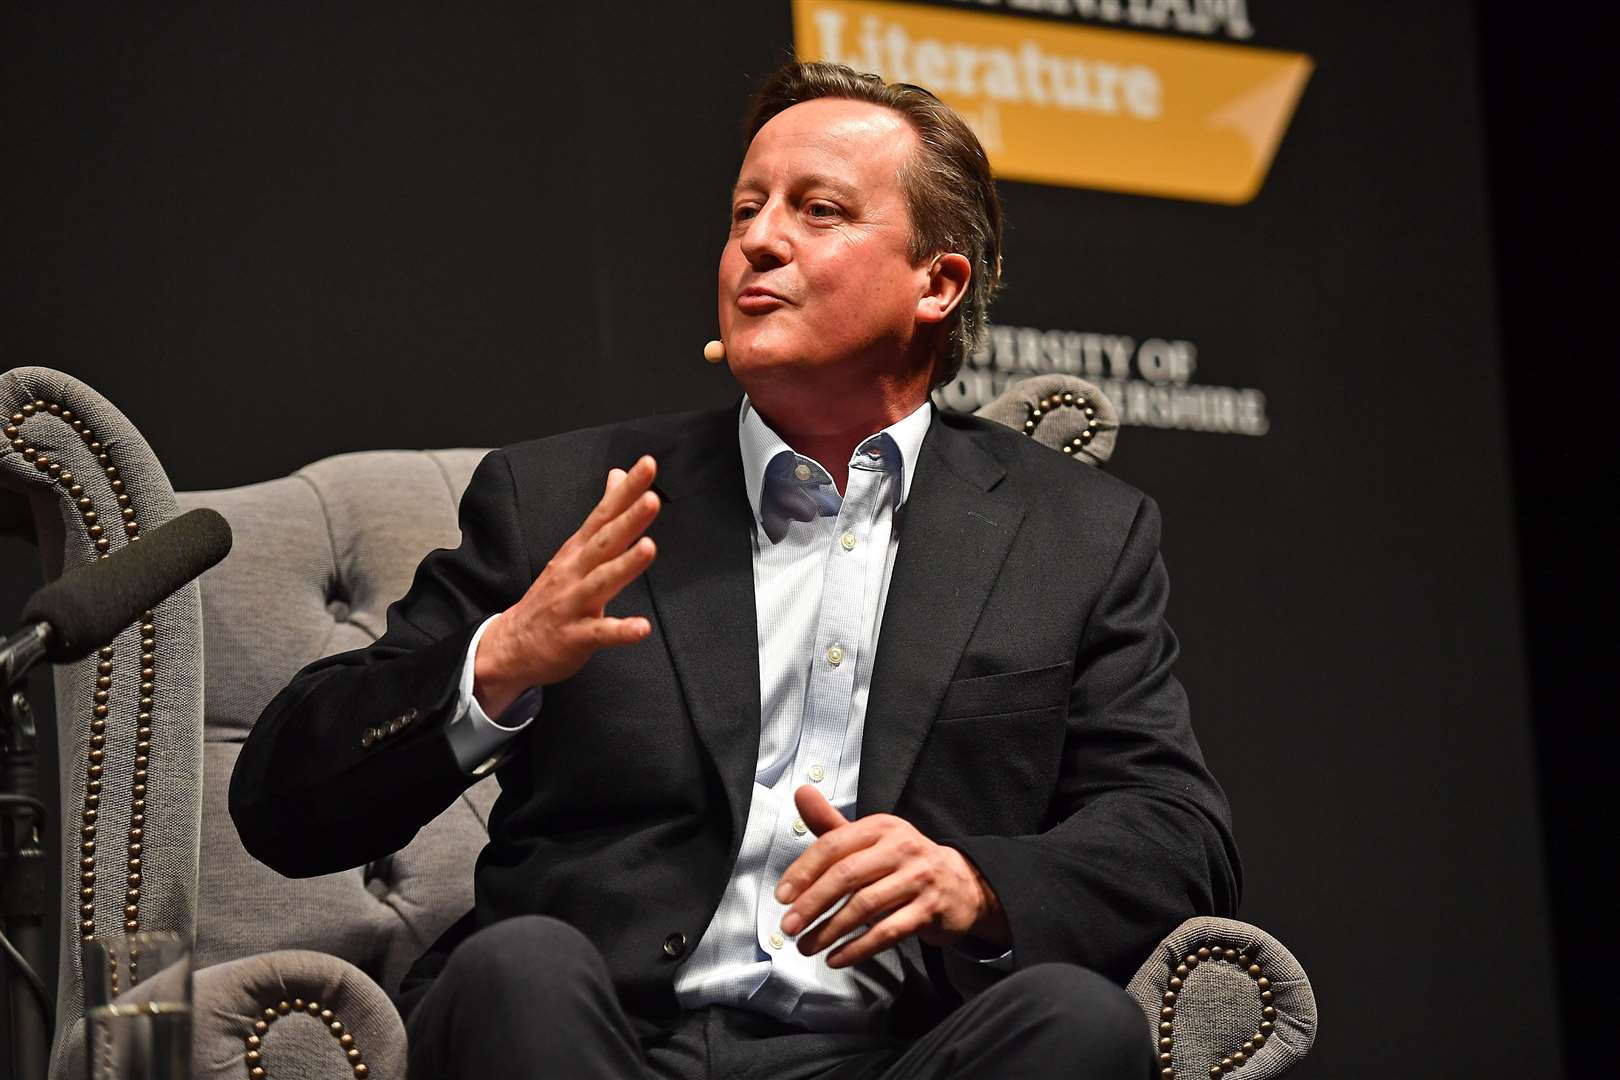 David Cameron has been at the centre of a storm over government lobbying (Jacob King/PA)